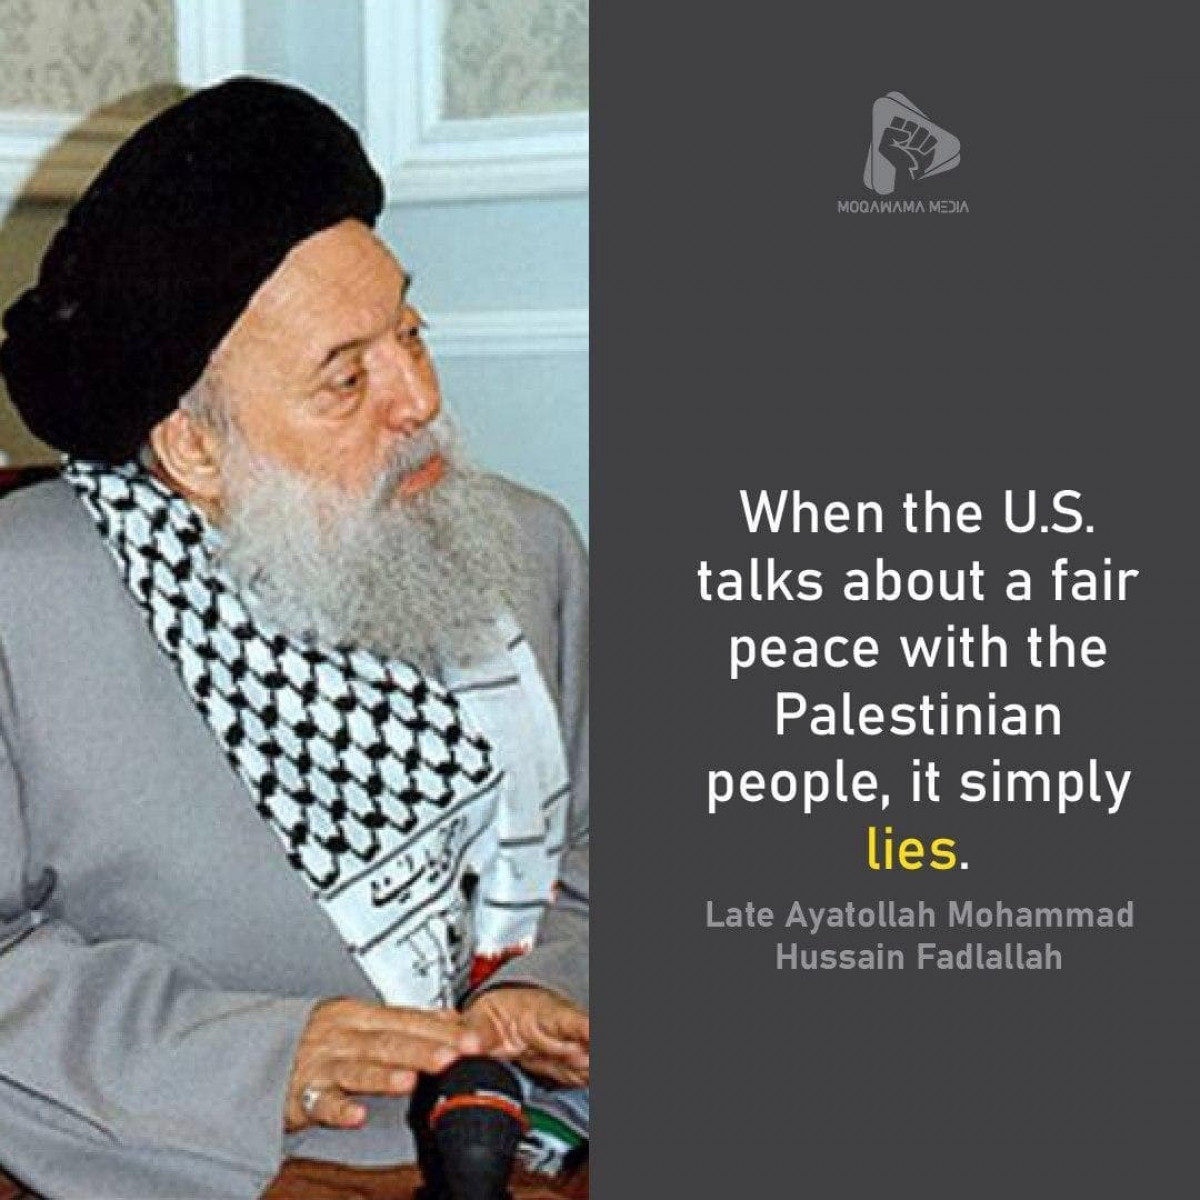 When the U.S. talks about a fair peace with the Palestinian people, it simply lies.